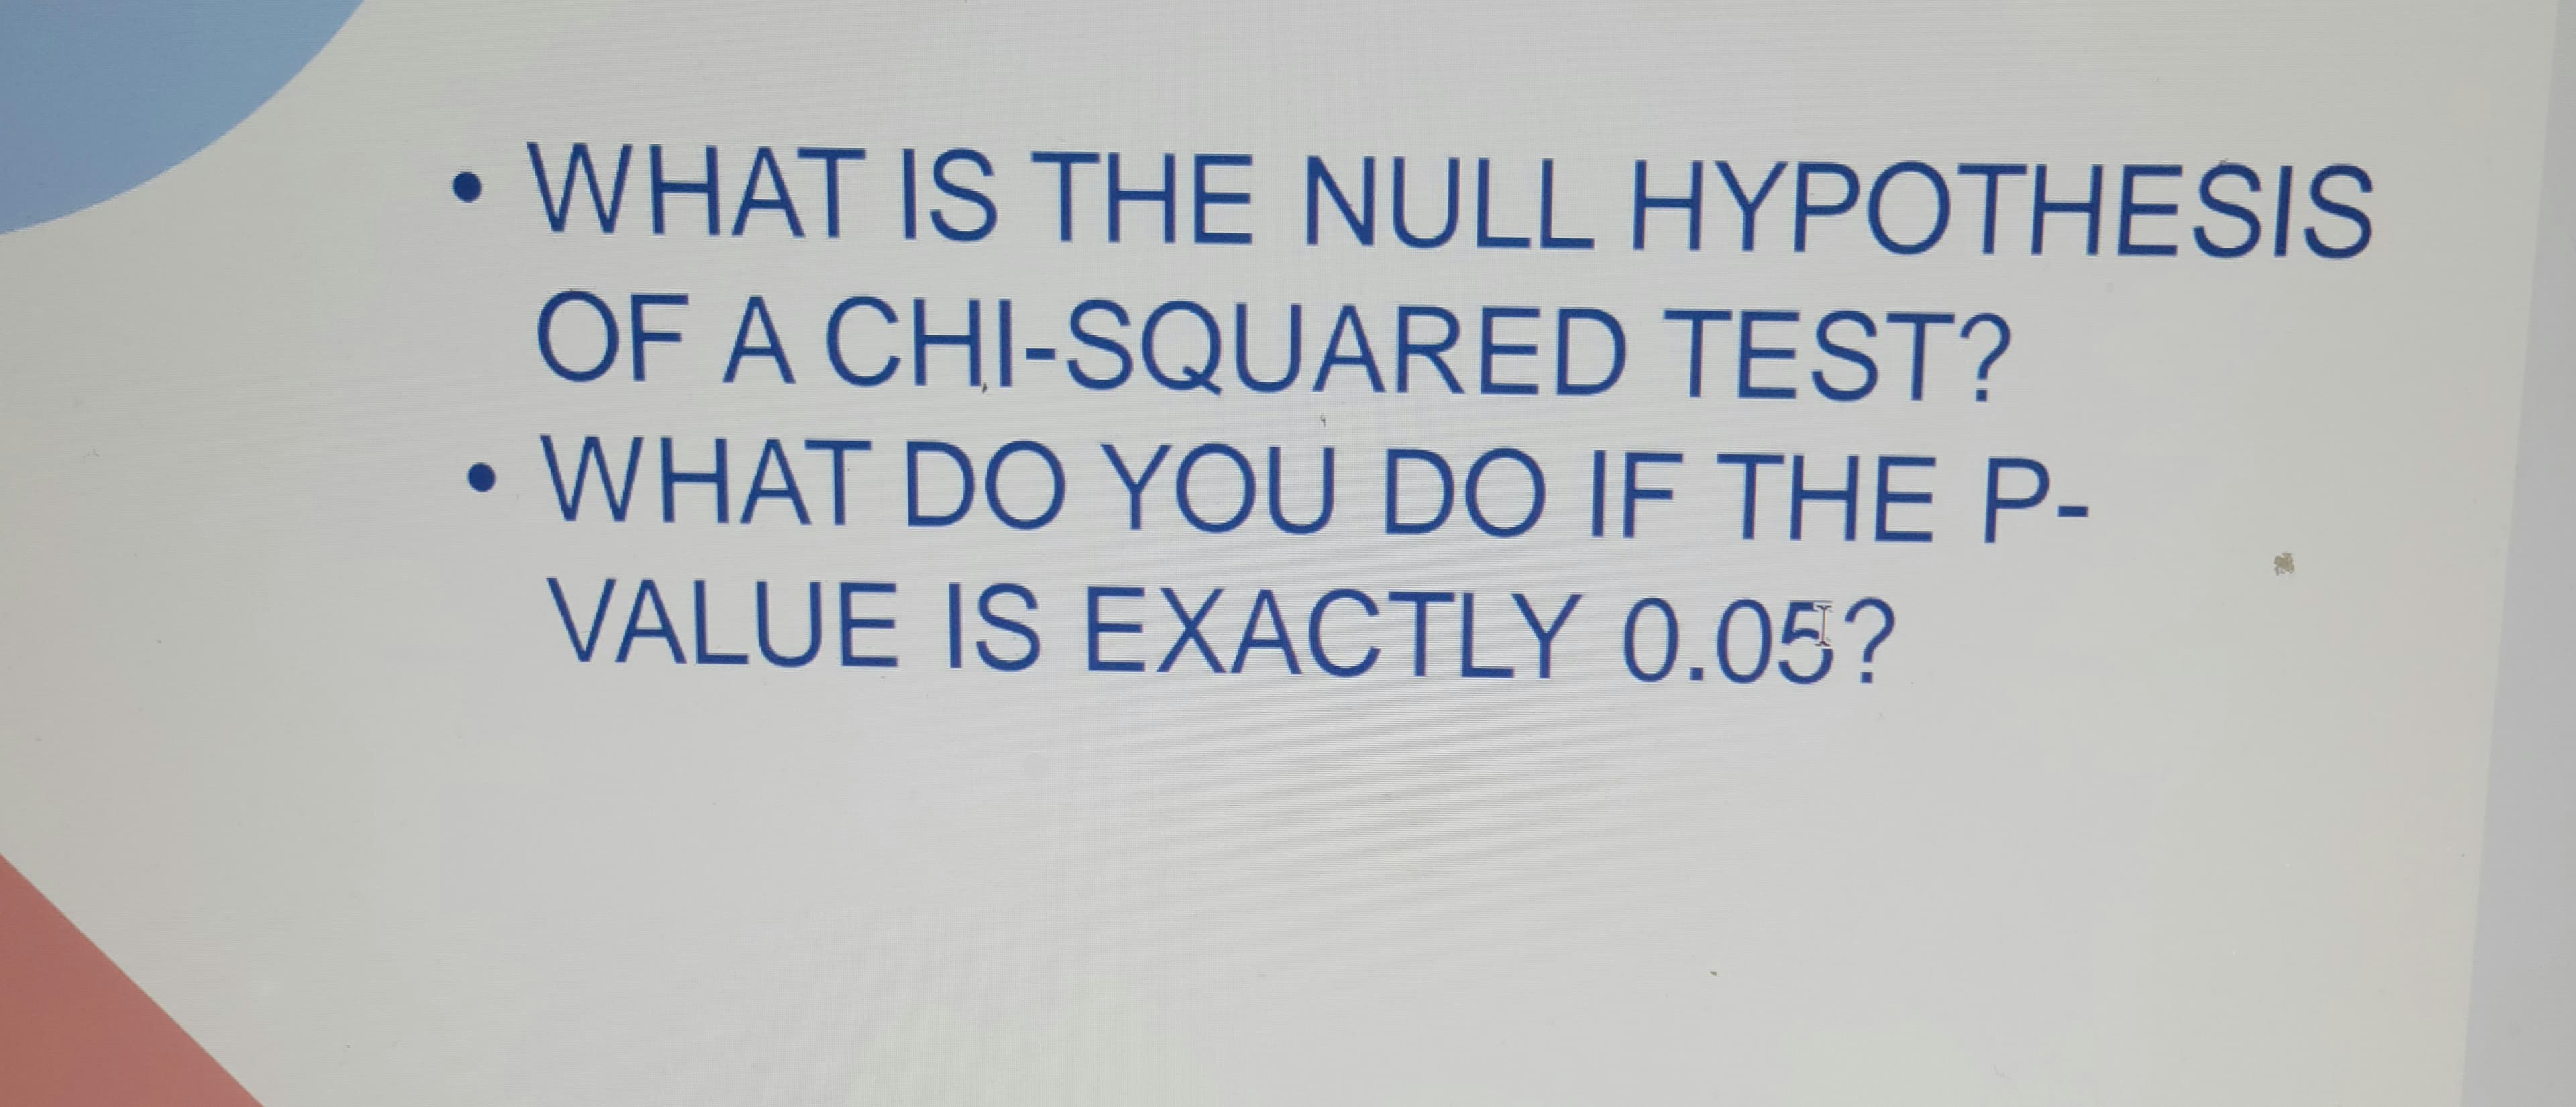 WHAT IS THE NULL HYPOTHESIS
OF A CHI-SQUARED TEST?
• WHAT DO YOU DO IF THE P-
●
VALUE IS EXACTLY 0.05?
●